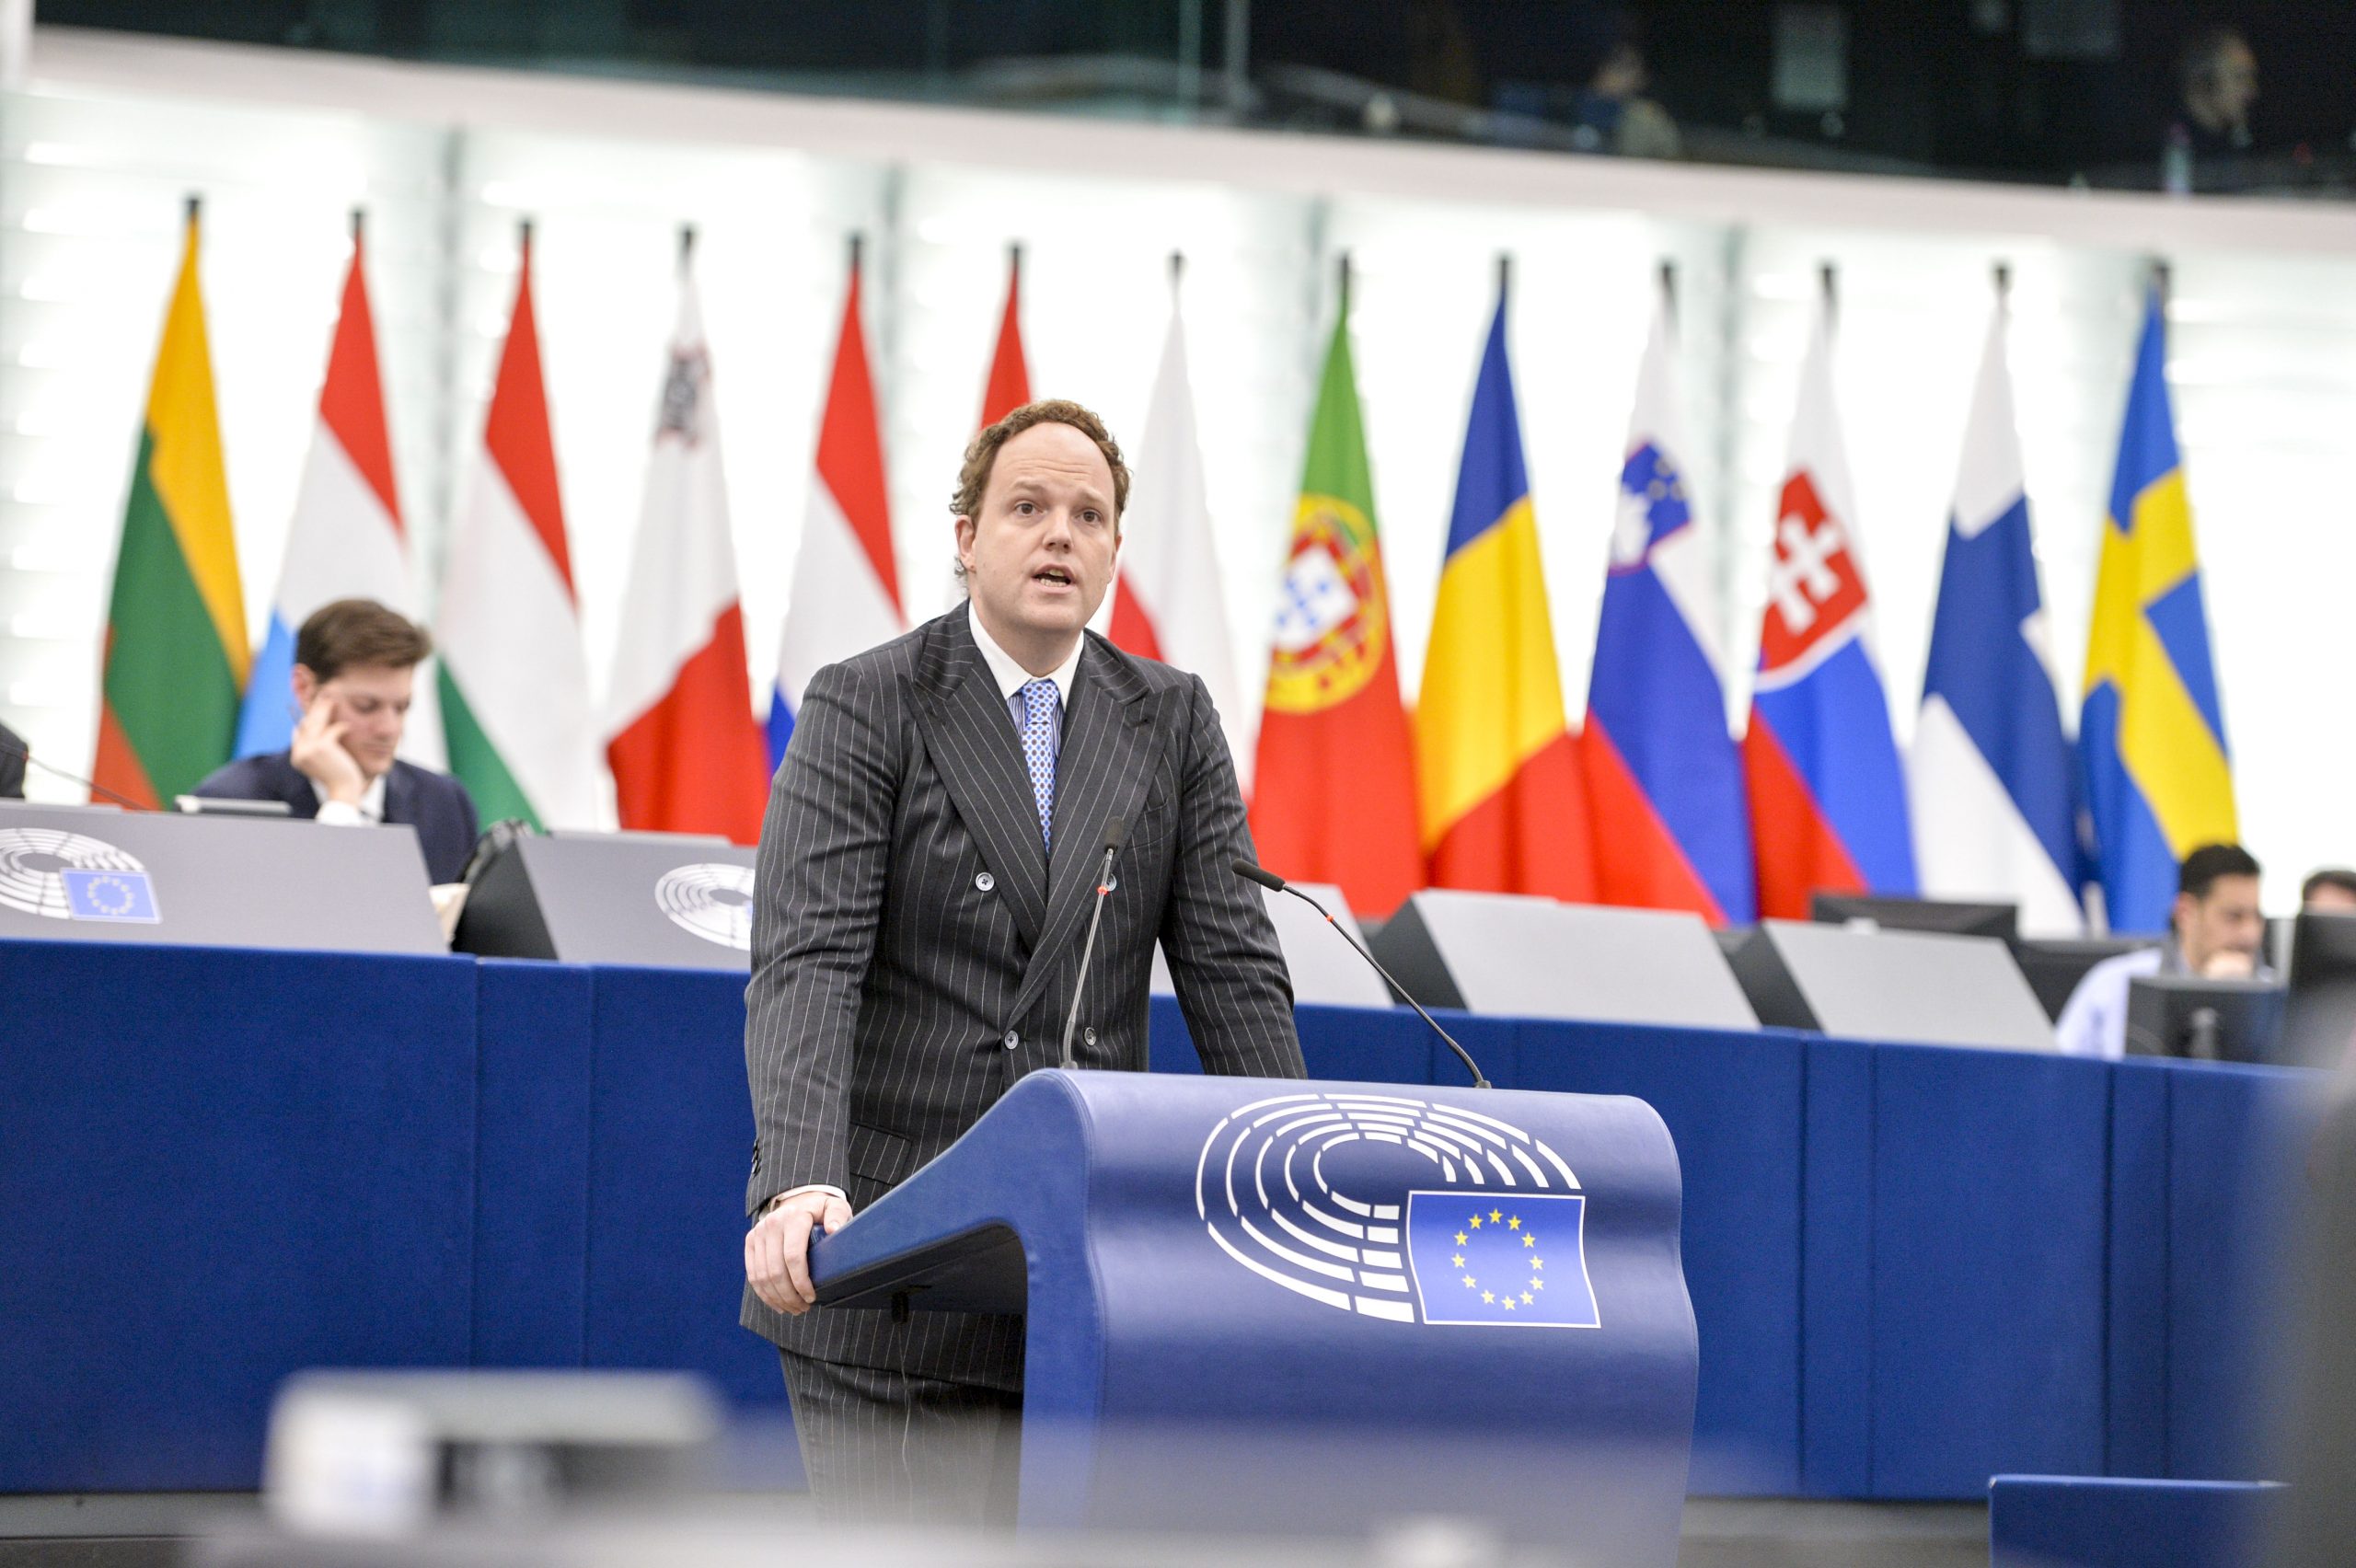 Fidesz MEP Accuses Commission of Serving the 